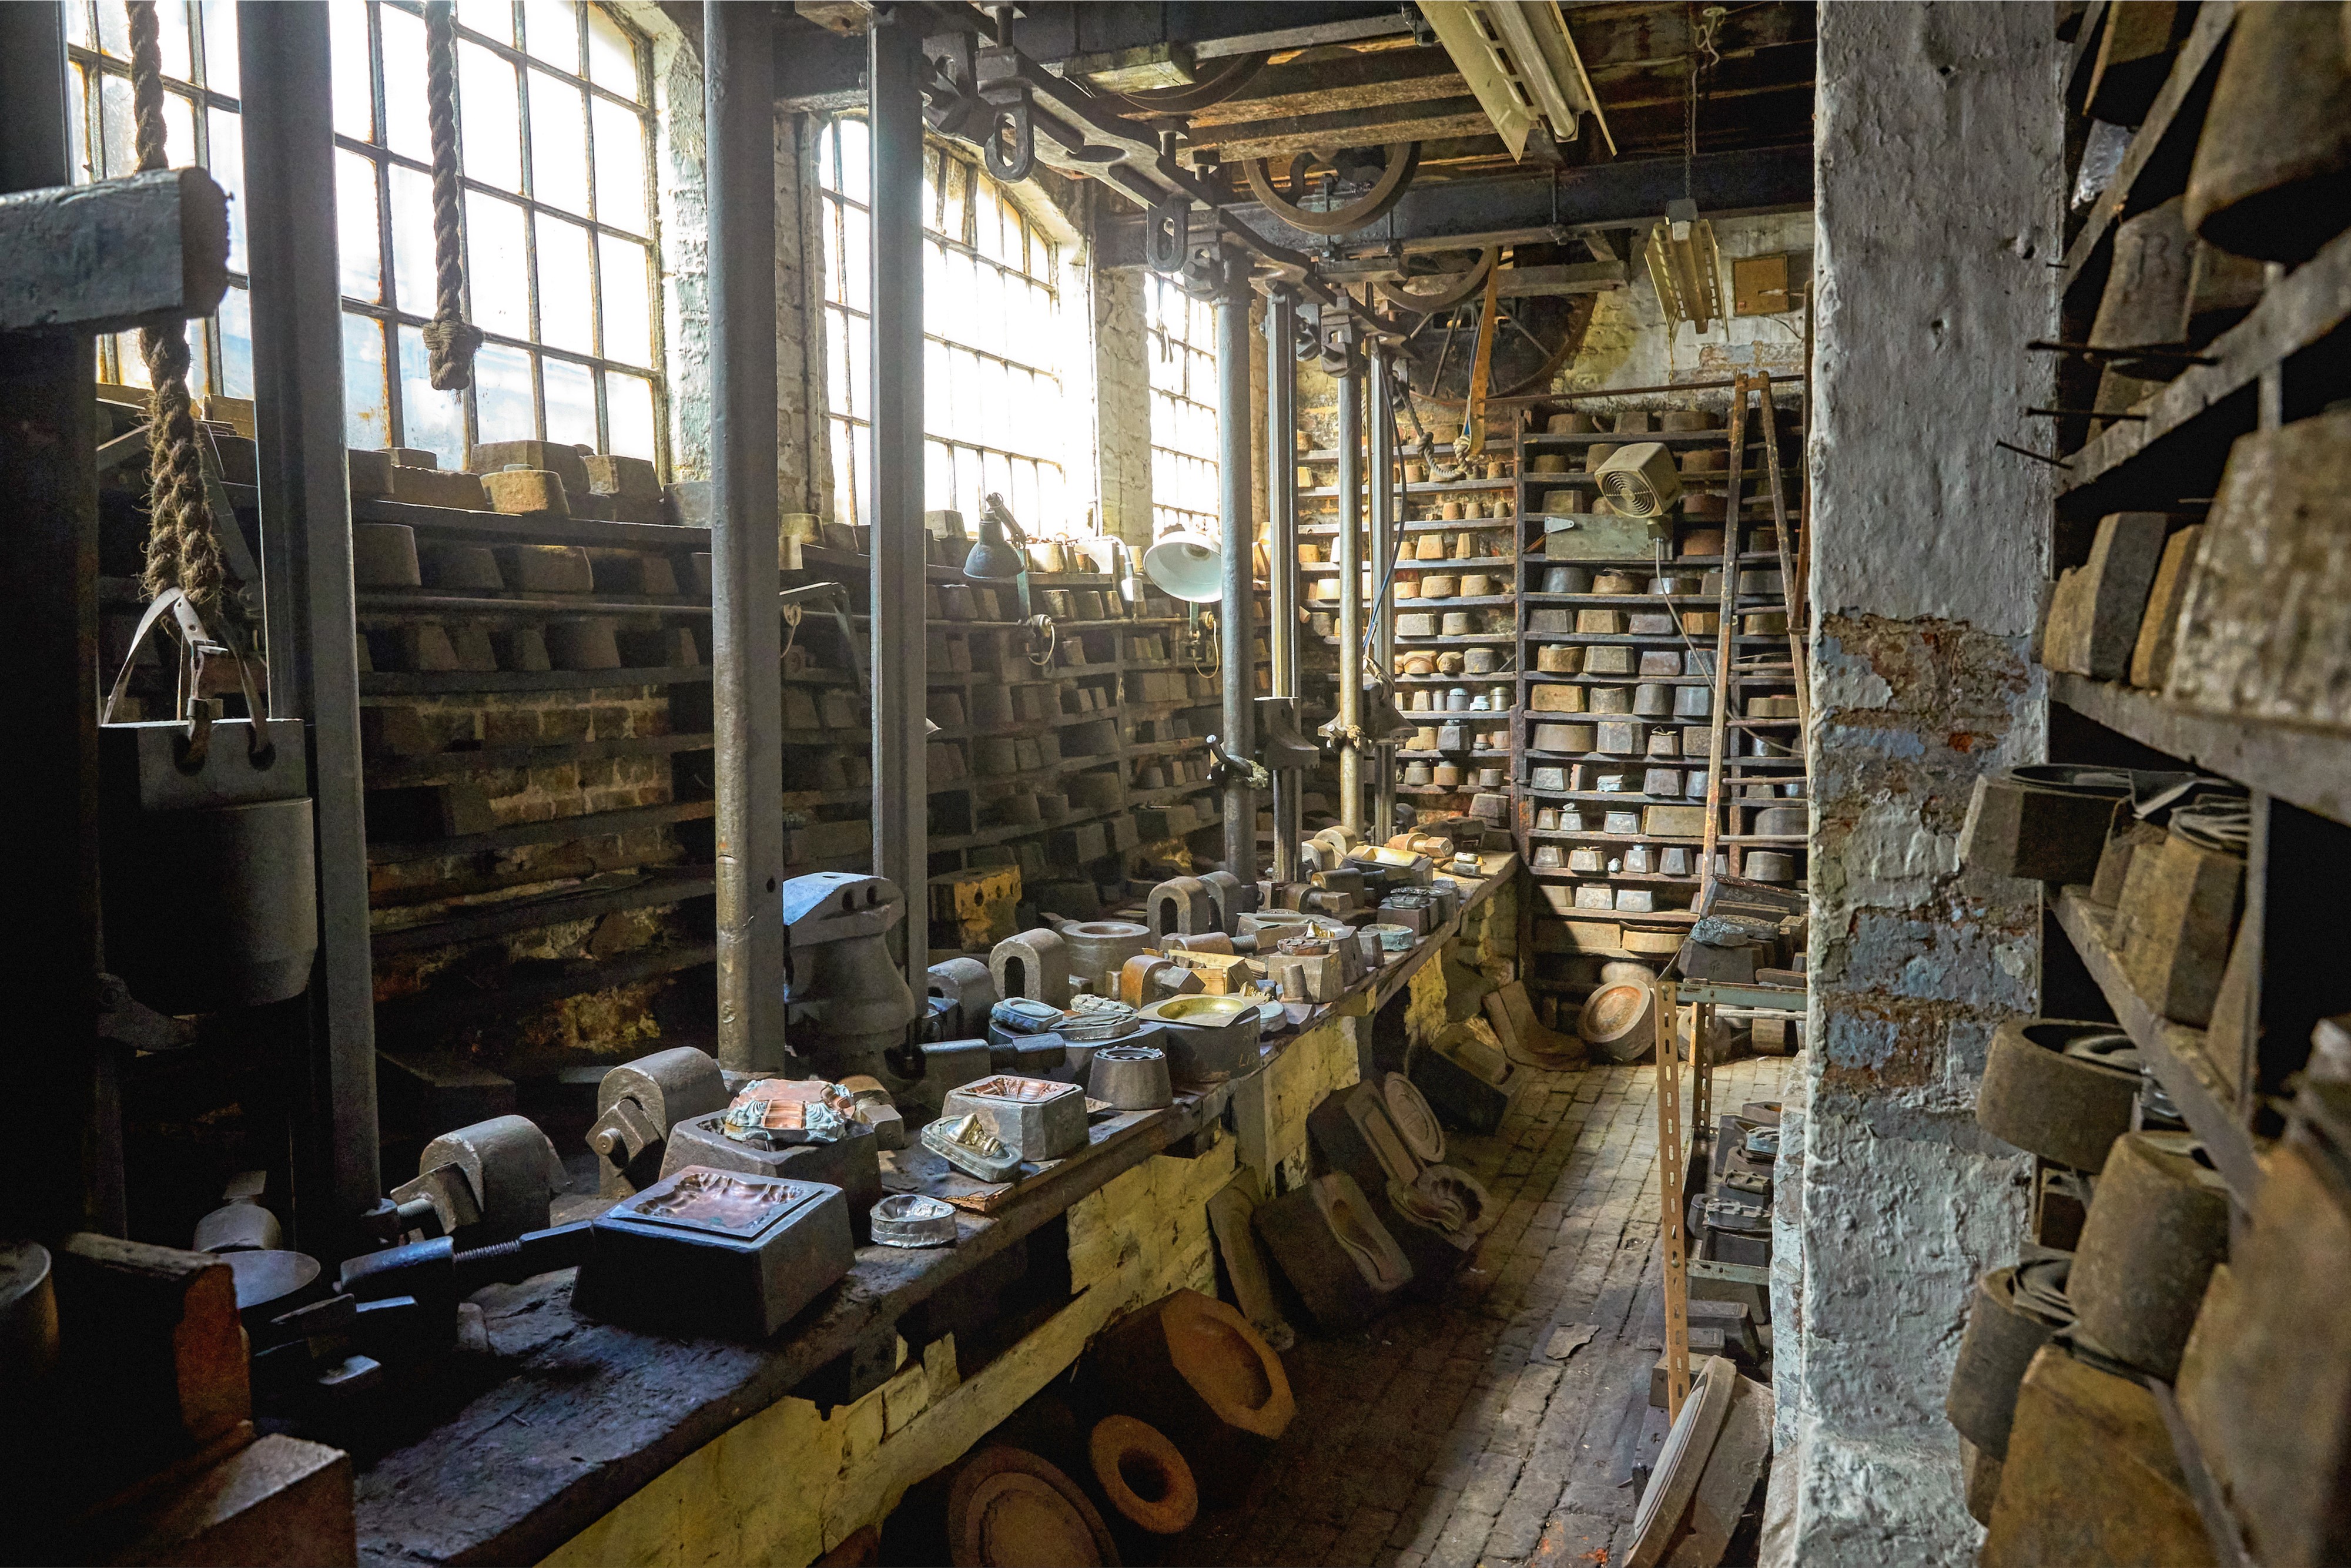 Photo of a storage room at the J.W. Evans Silver Factory in Birmingham